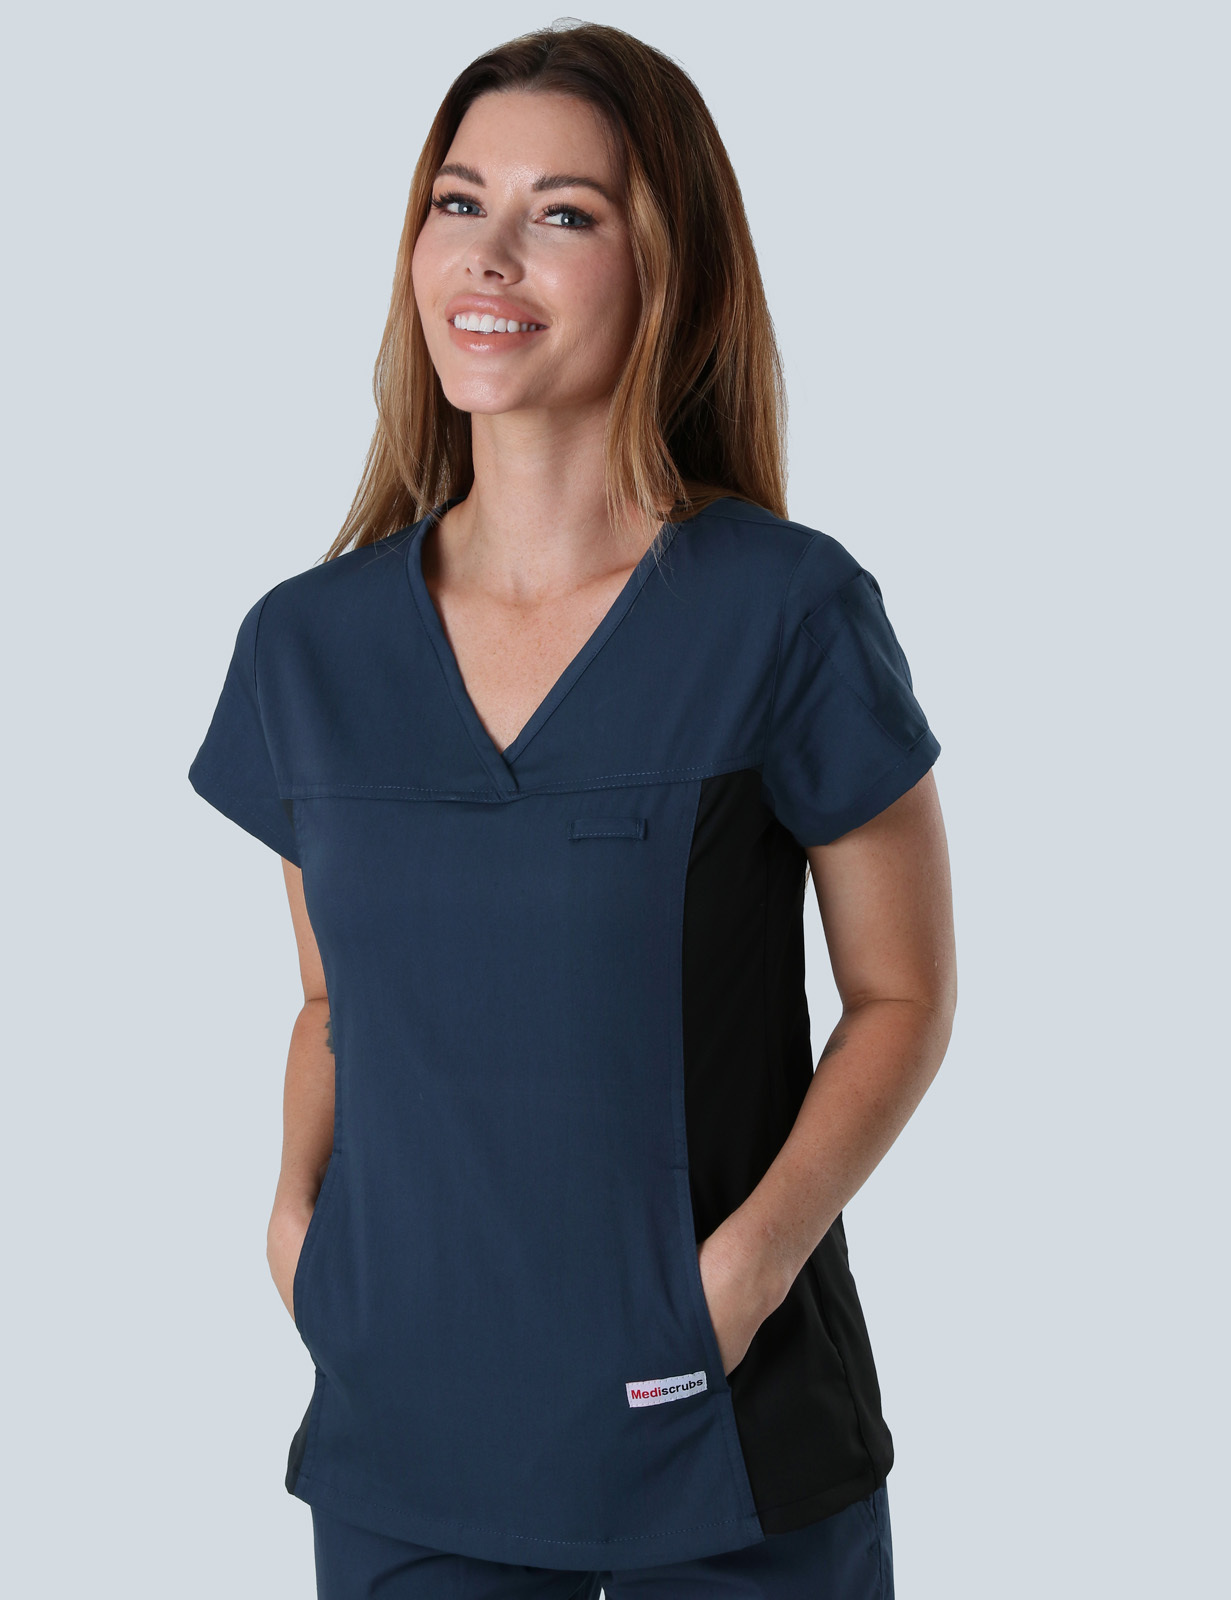 Pathology North (Women's Fit Spandex Scrub Top in Navy and Cargo Pants in Black incl Logos)